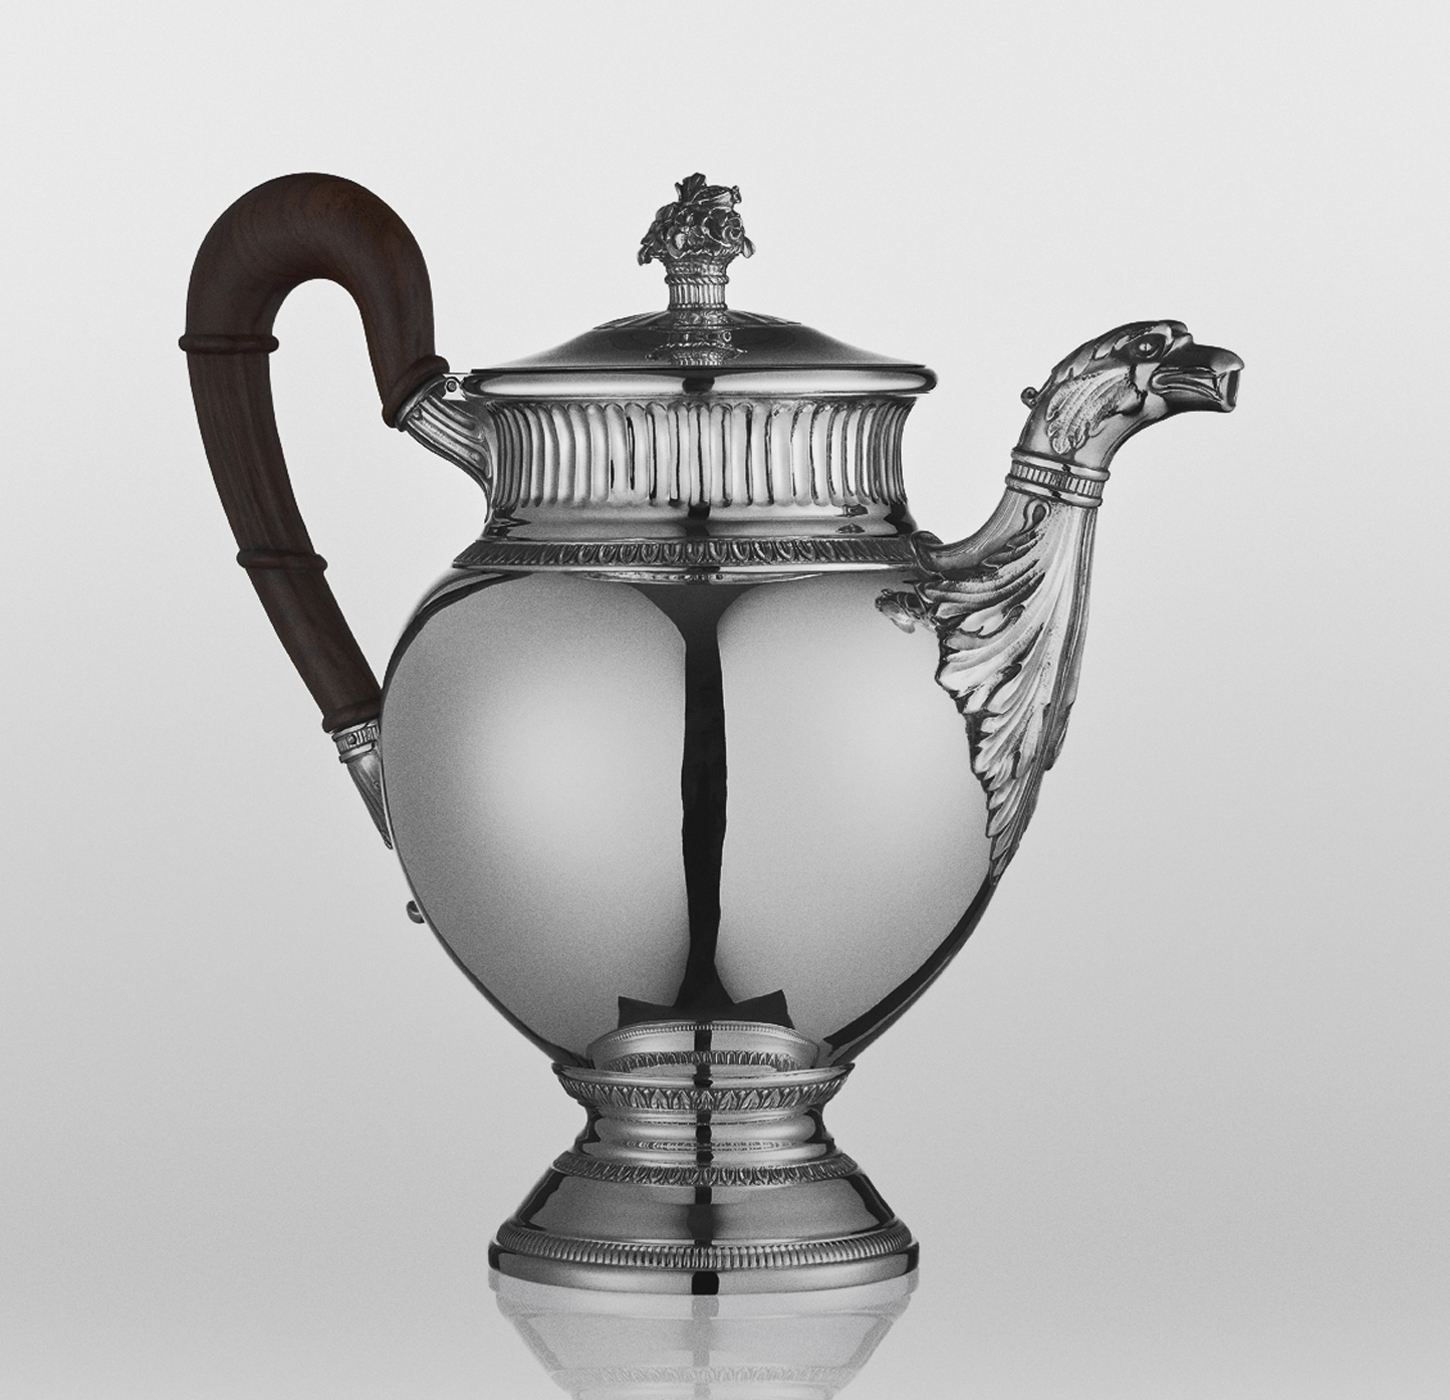 Biennais tea pot in sterling silver and wood